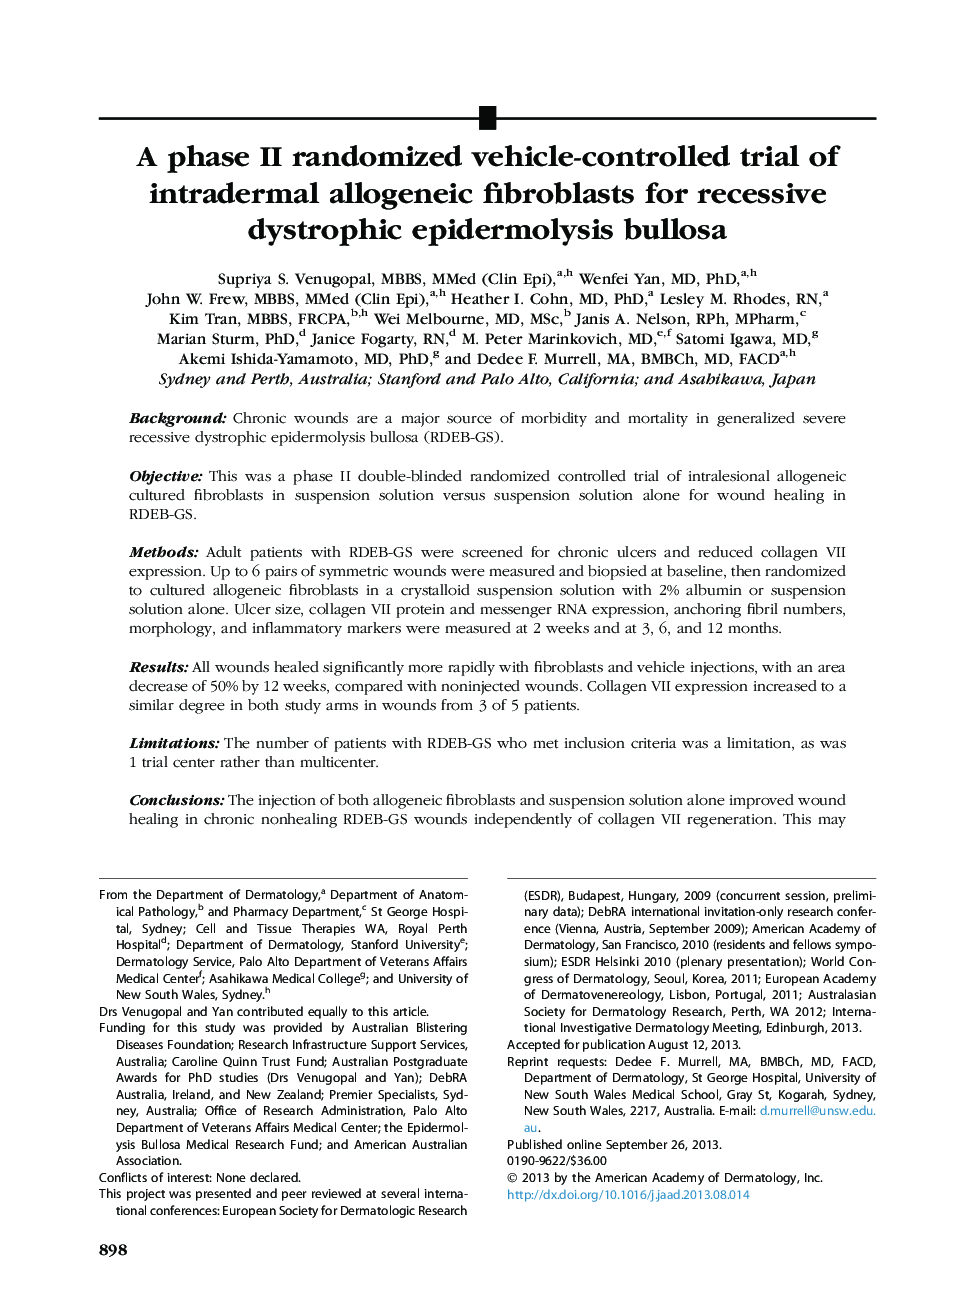 A phase II randomized vehicle-controlled trial of intradermal allogeneic fibroblasts for recessive dystrophic epidermolysis bullosa